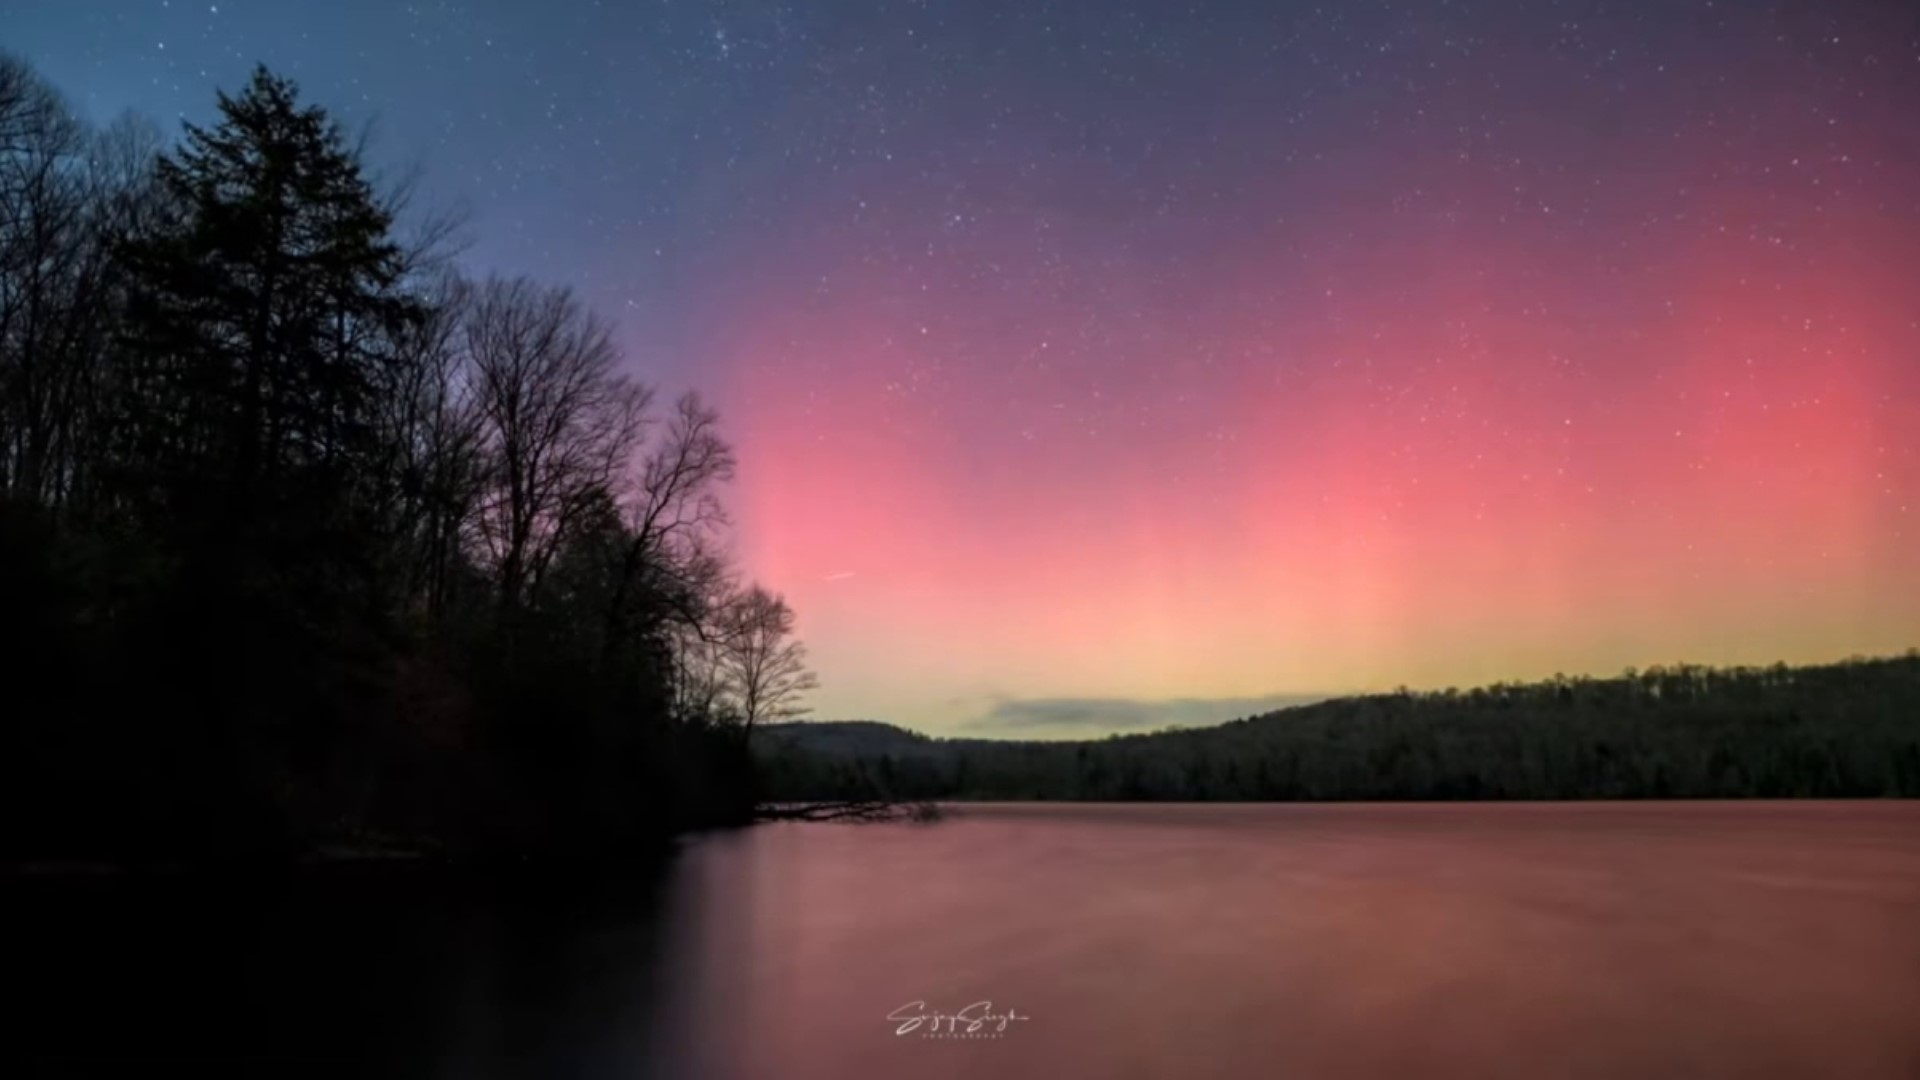 The Northern Lights were seen over the weekend in Sullivan County, and an area photographer was able to capture the phenomenon.